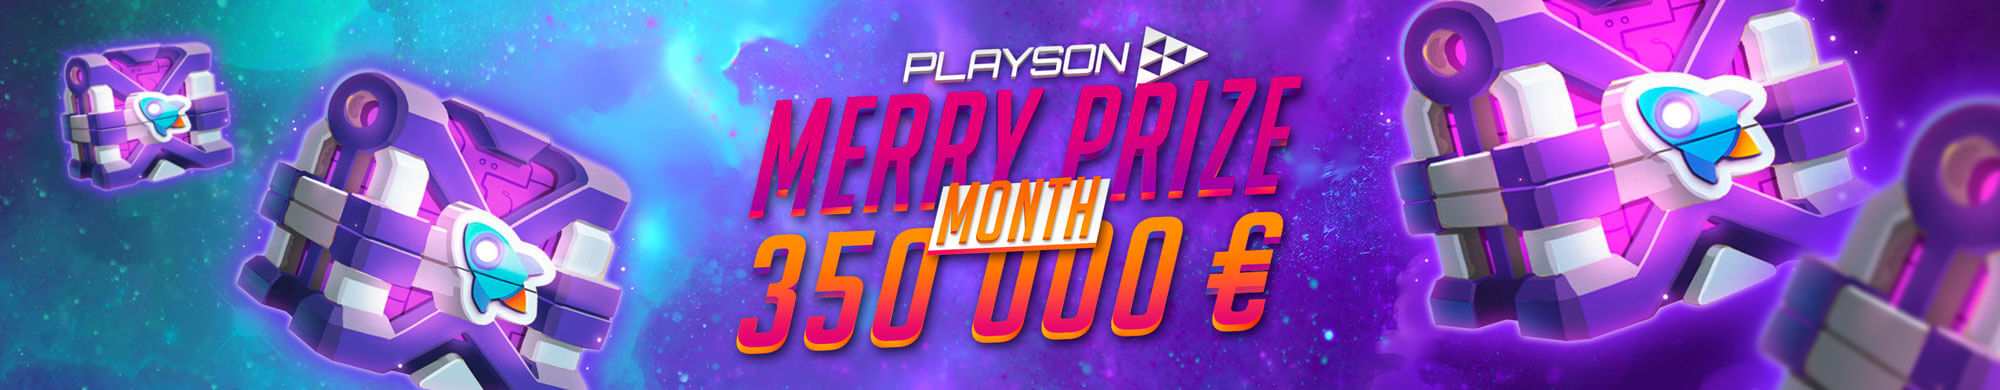 Playson Merry Prize Month 350k